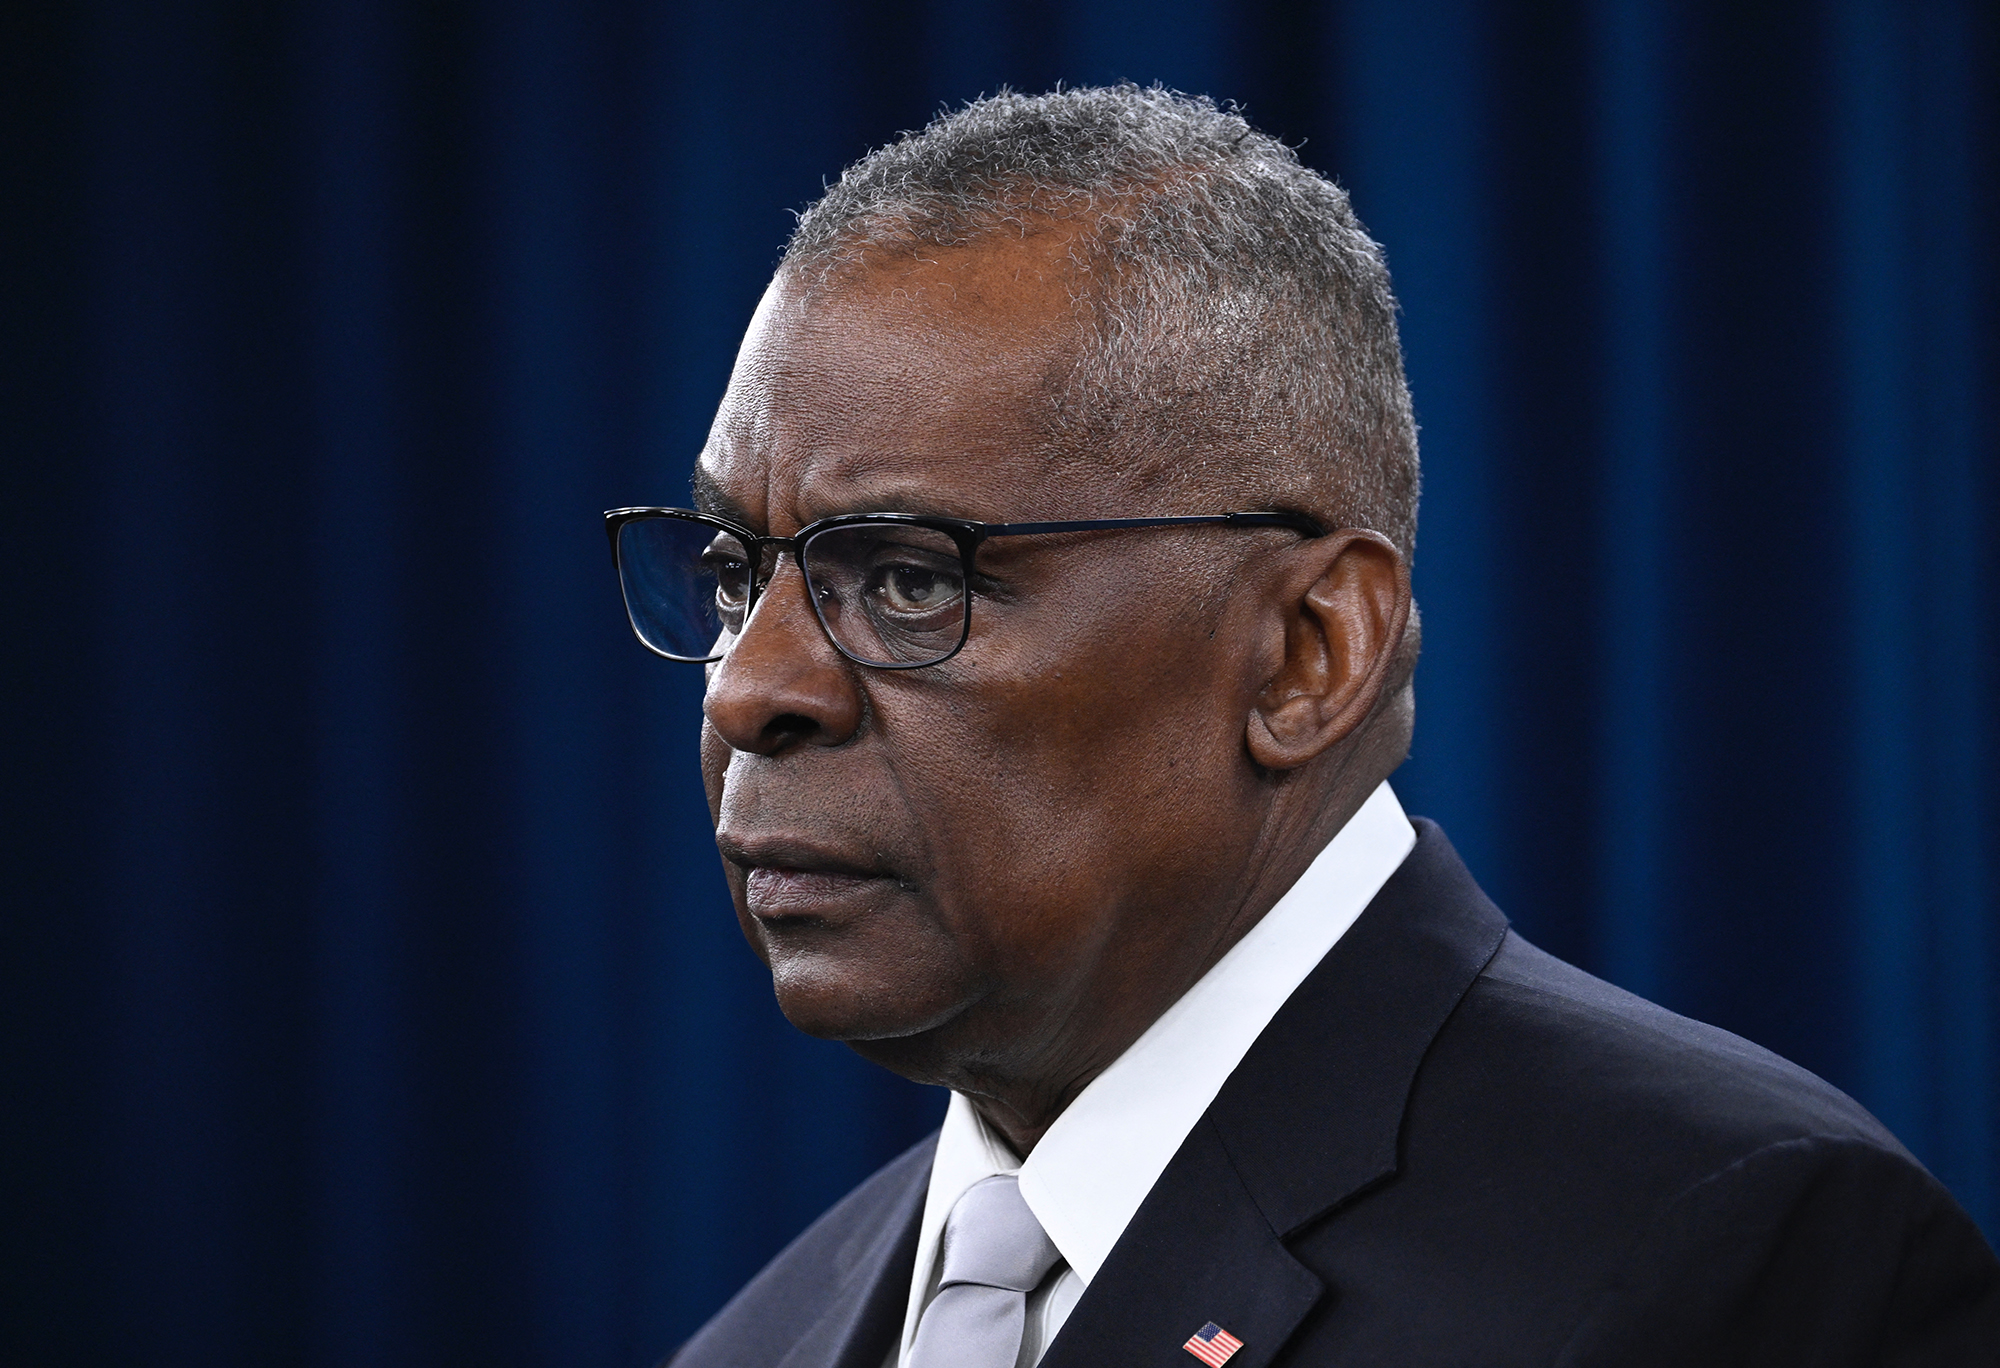 US Defense Secretary Lloyd Austin speaks during a press conference at the Pentagon in Washington D.C, on February 1.